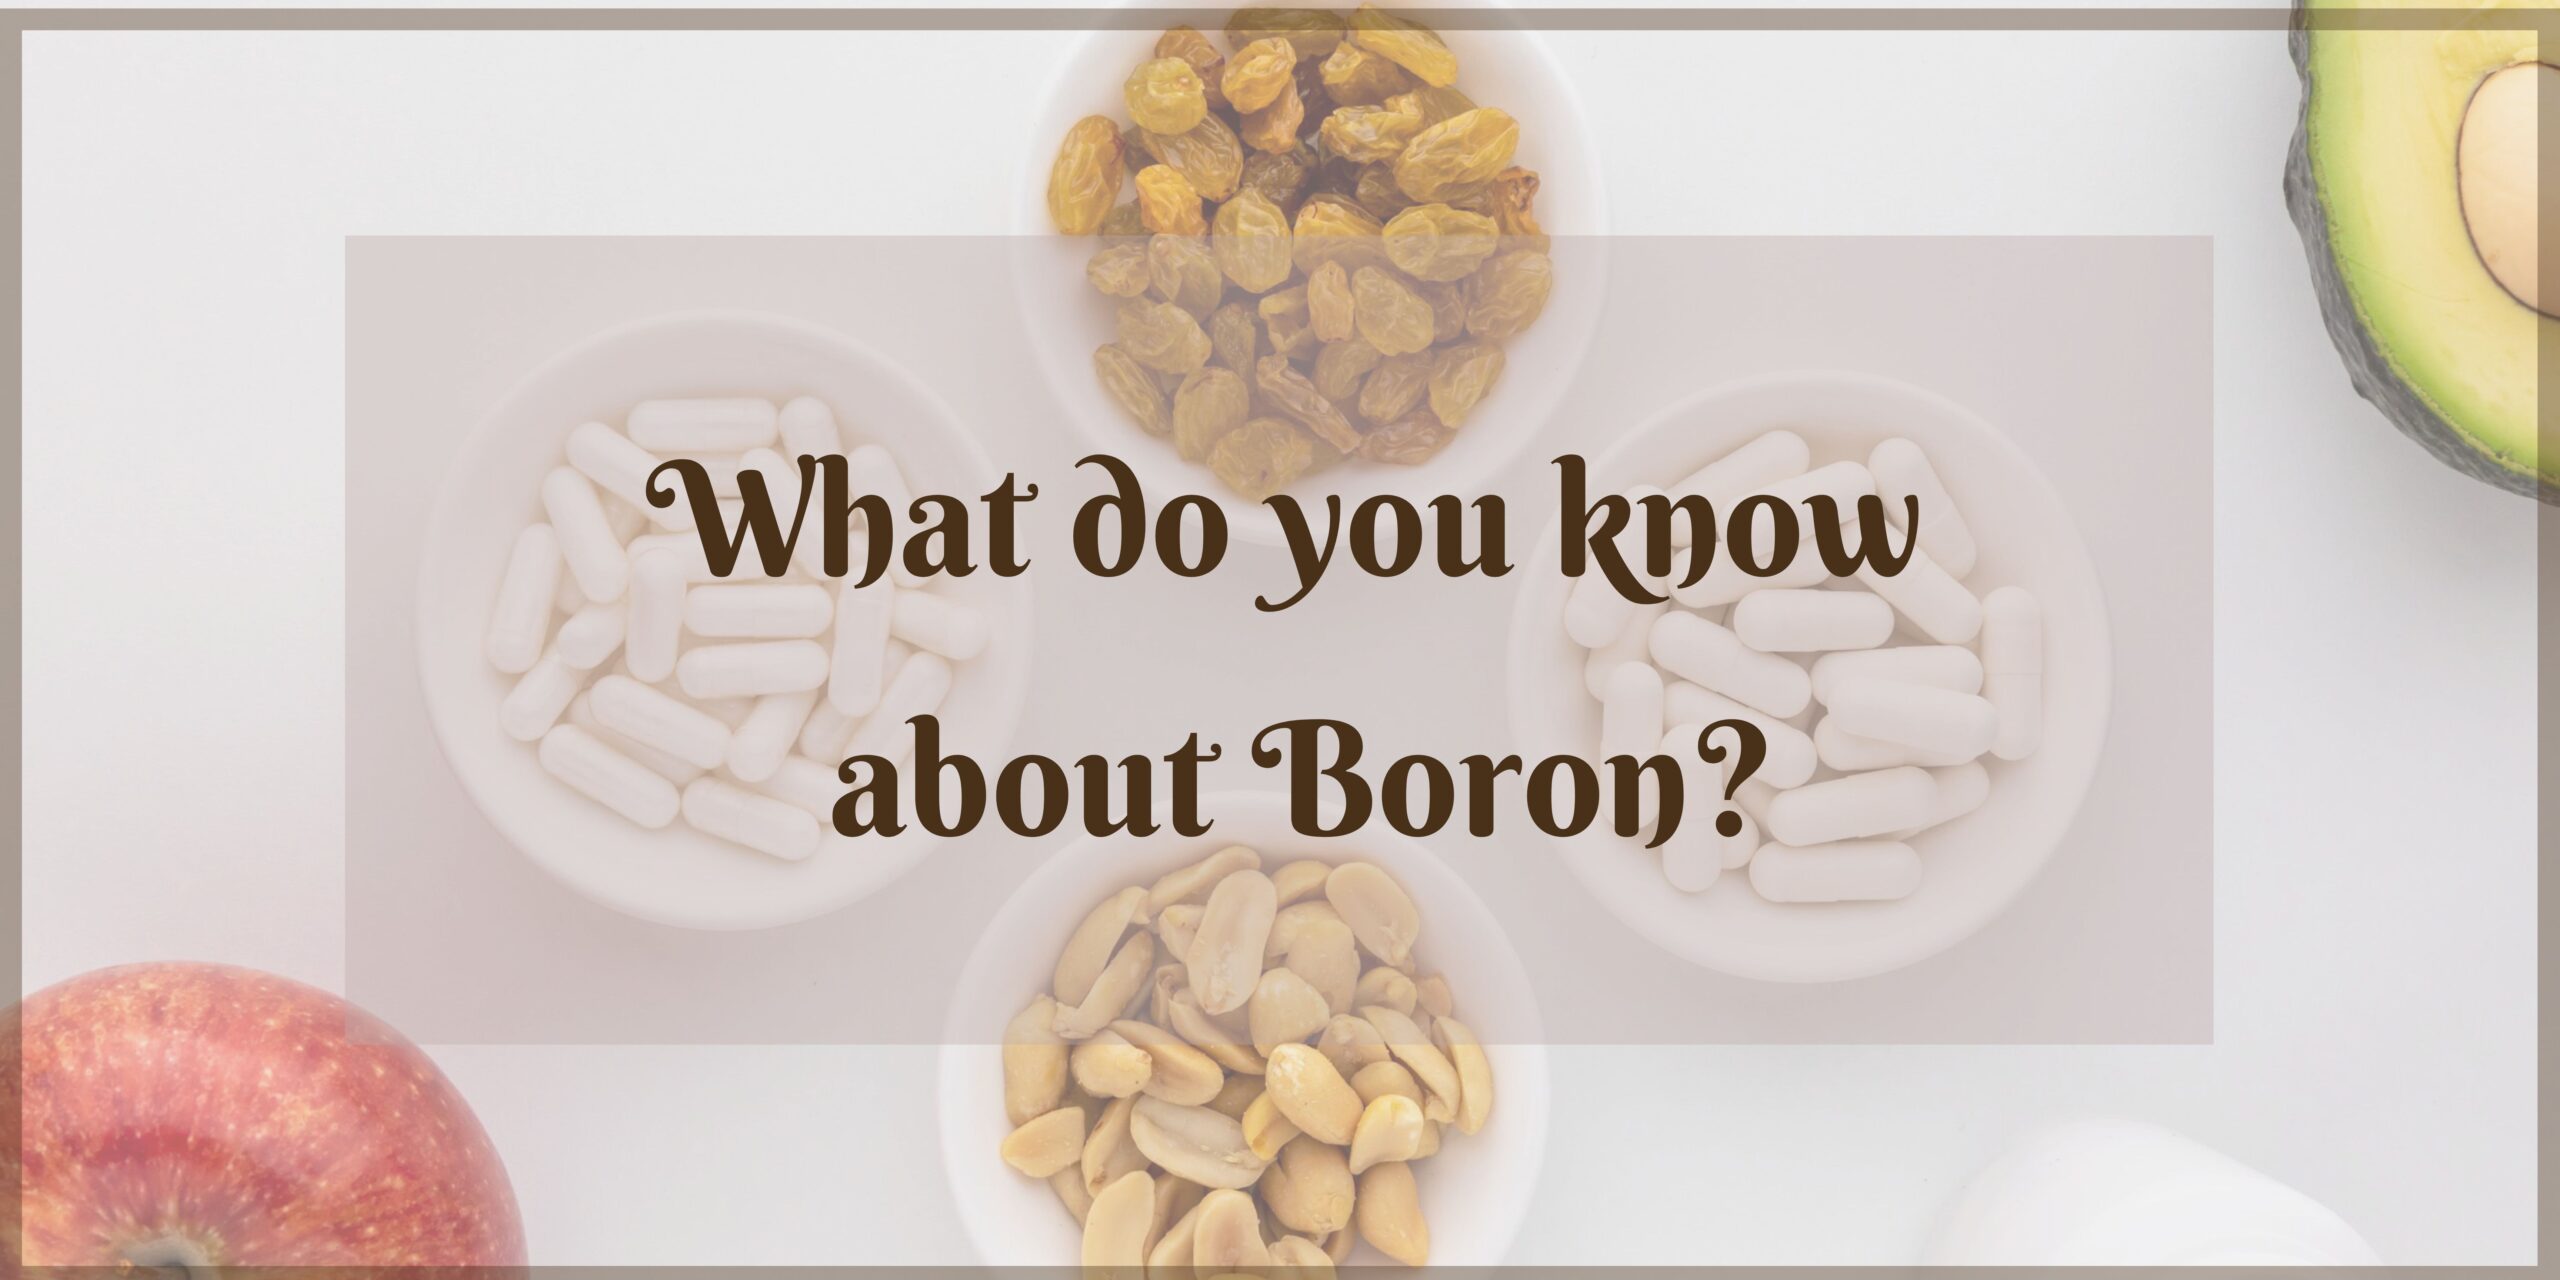 What do you know about Boron?